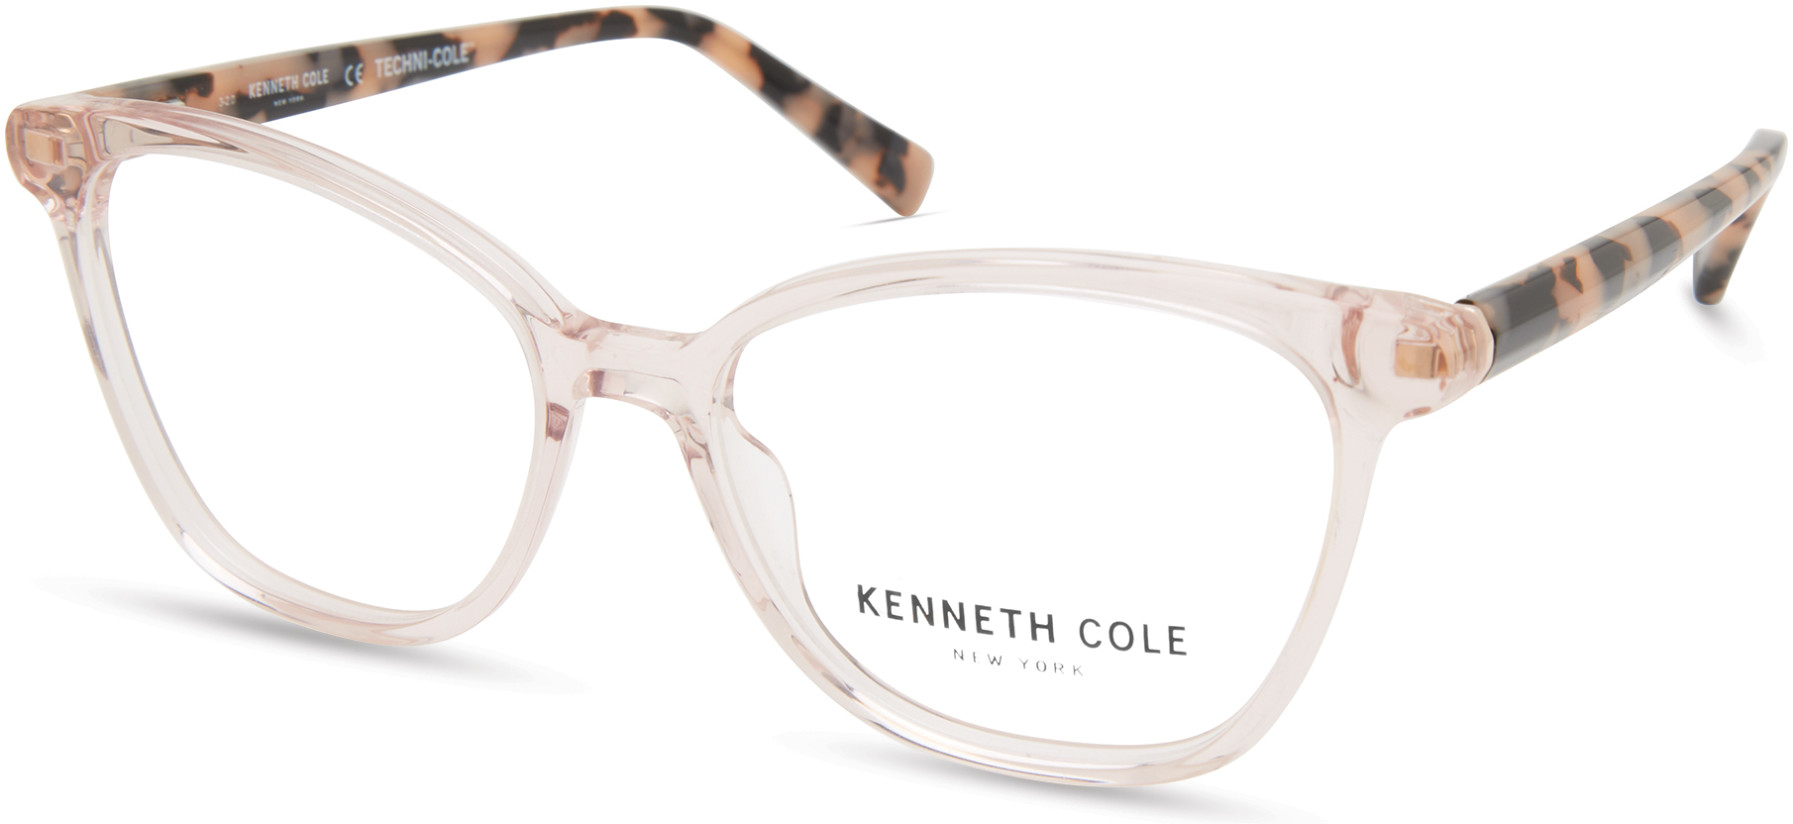 KENNETH COLE NY 0327 072